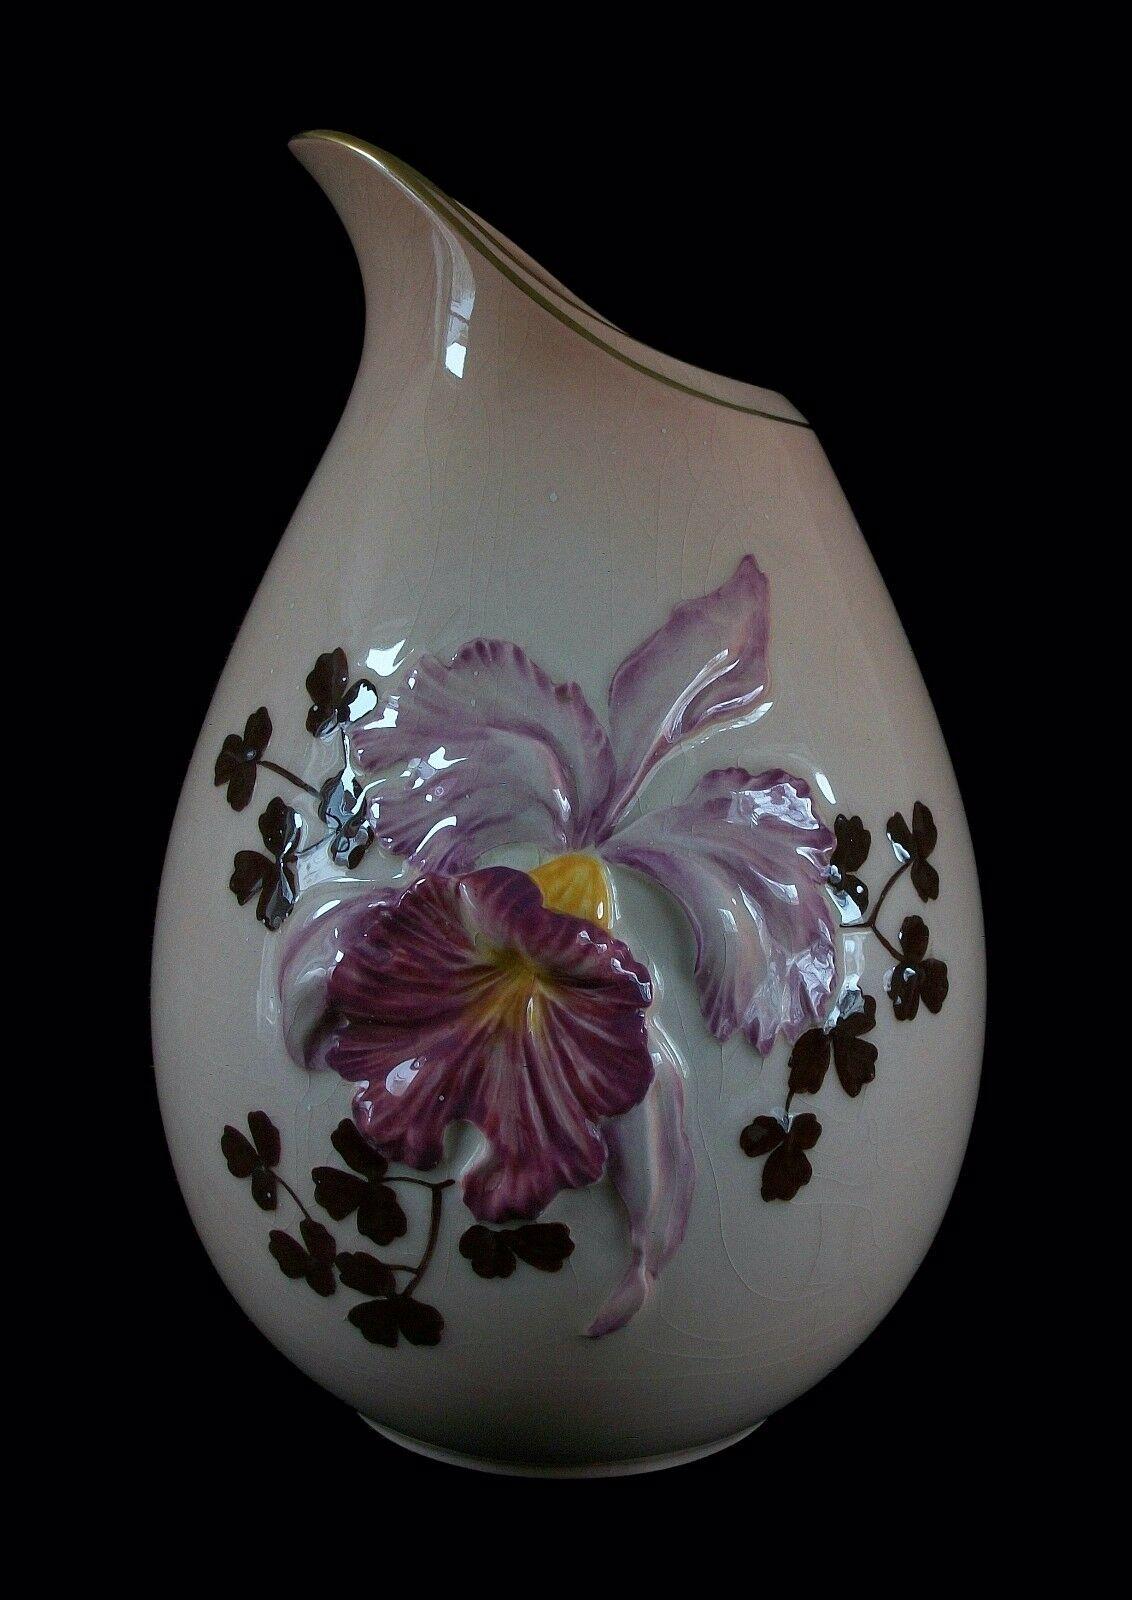 Carlton Ware - Australian design - Embossed Orchid pattern - Rare large hand painted blush pink ceramic vase with brown clovers - gold gilding to the rim - signed on the base - United Kingdom - mid 20th century. 

Excellent vintage condition - no